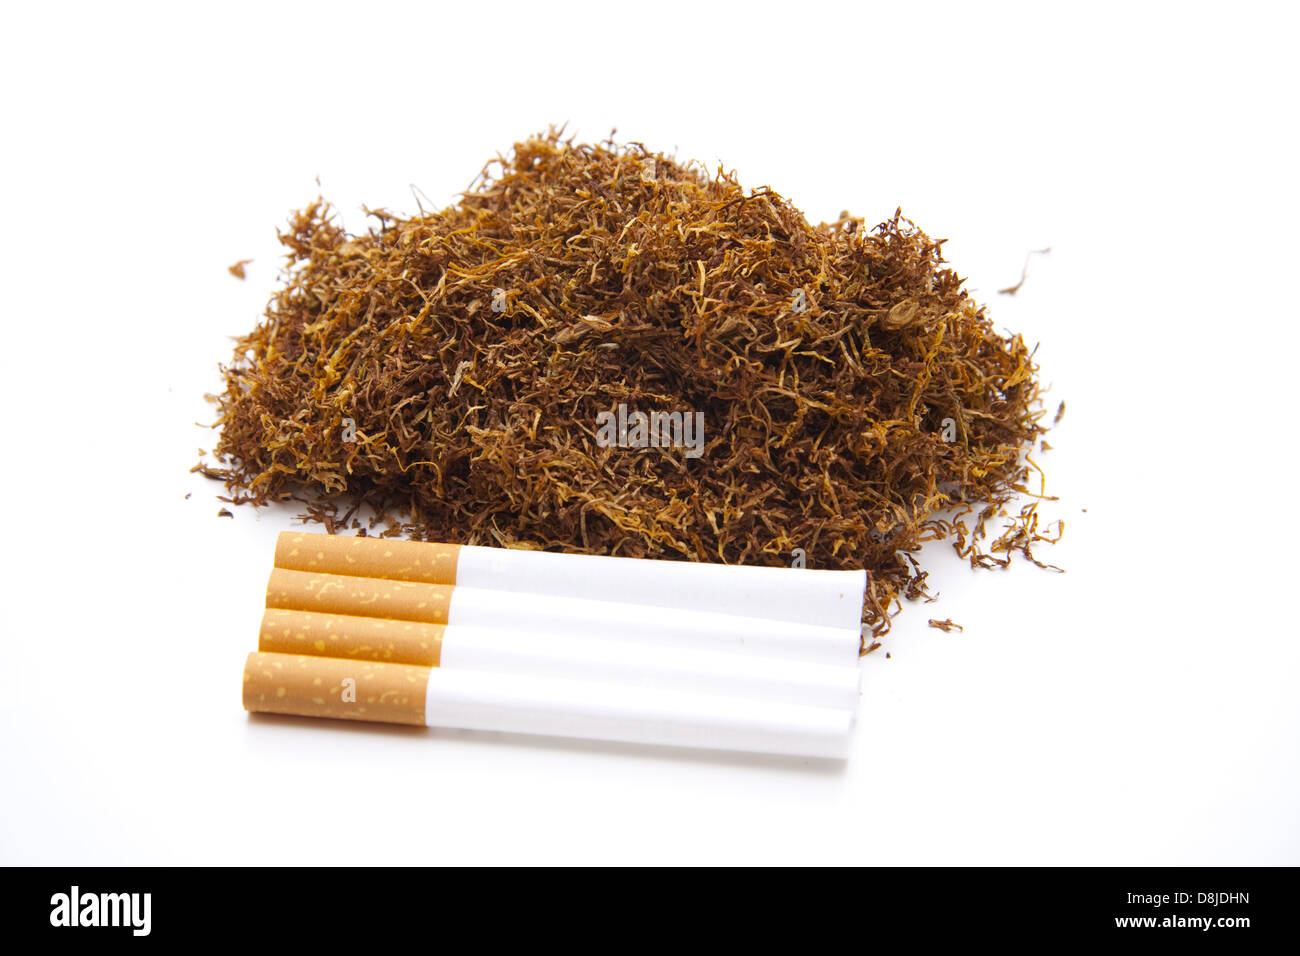 Tobacco with cigaret Stock Photo